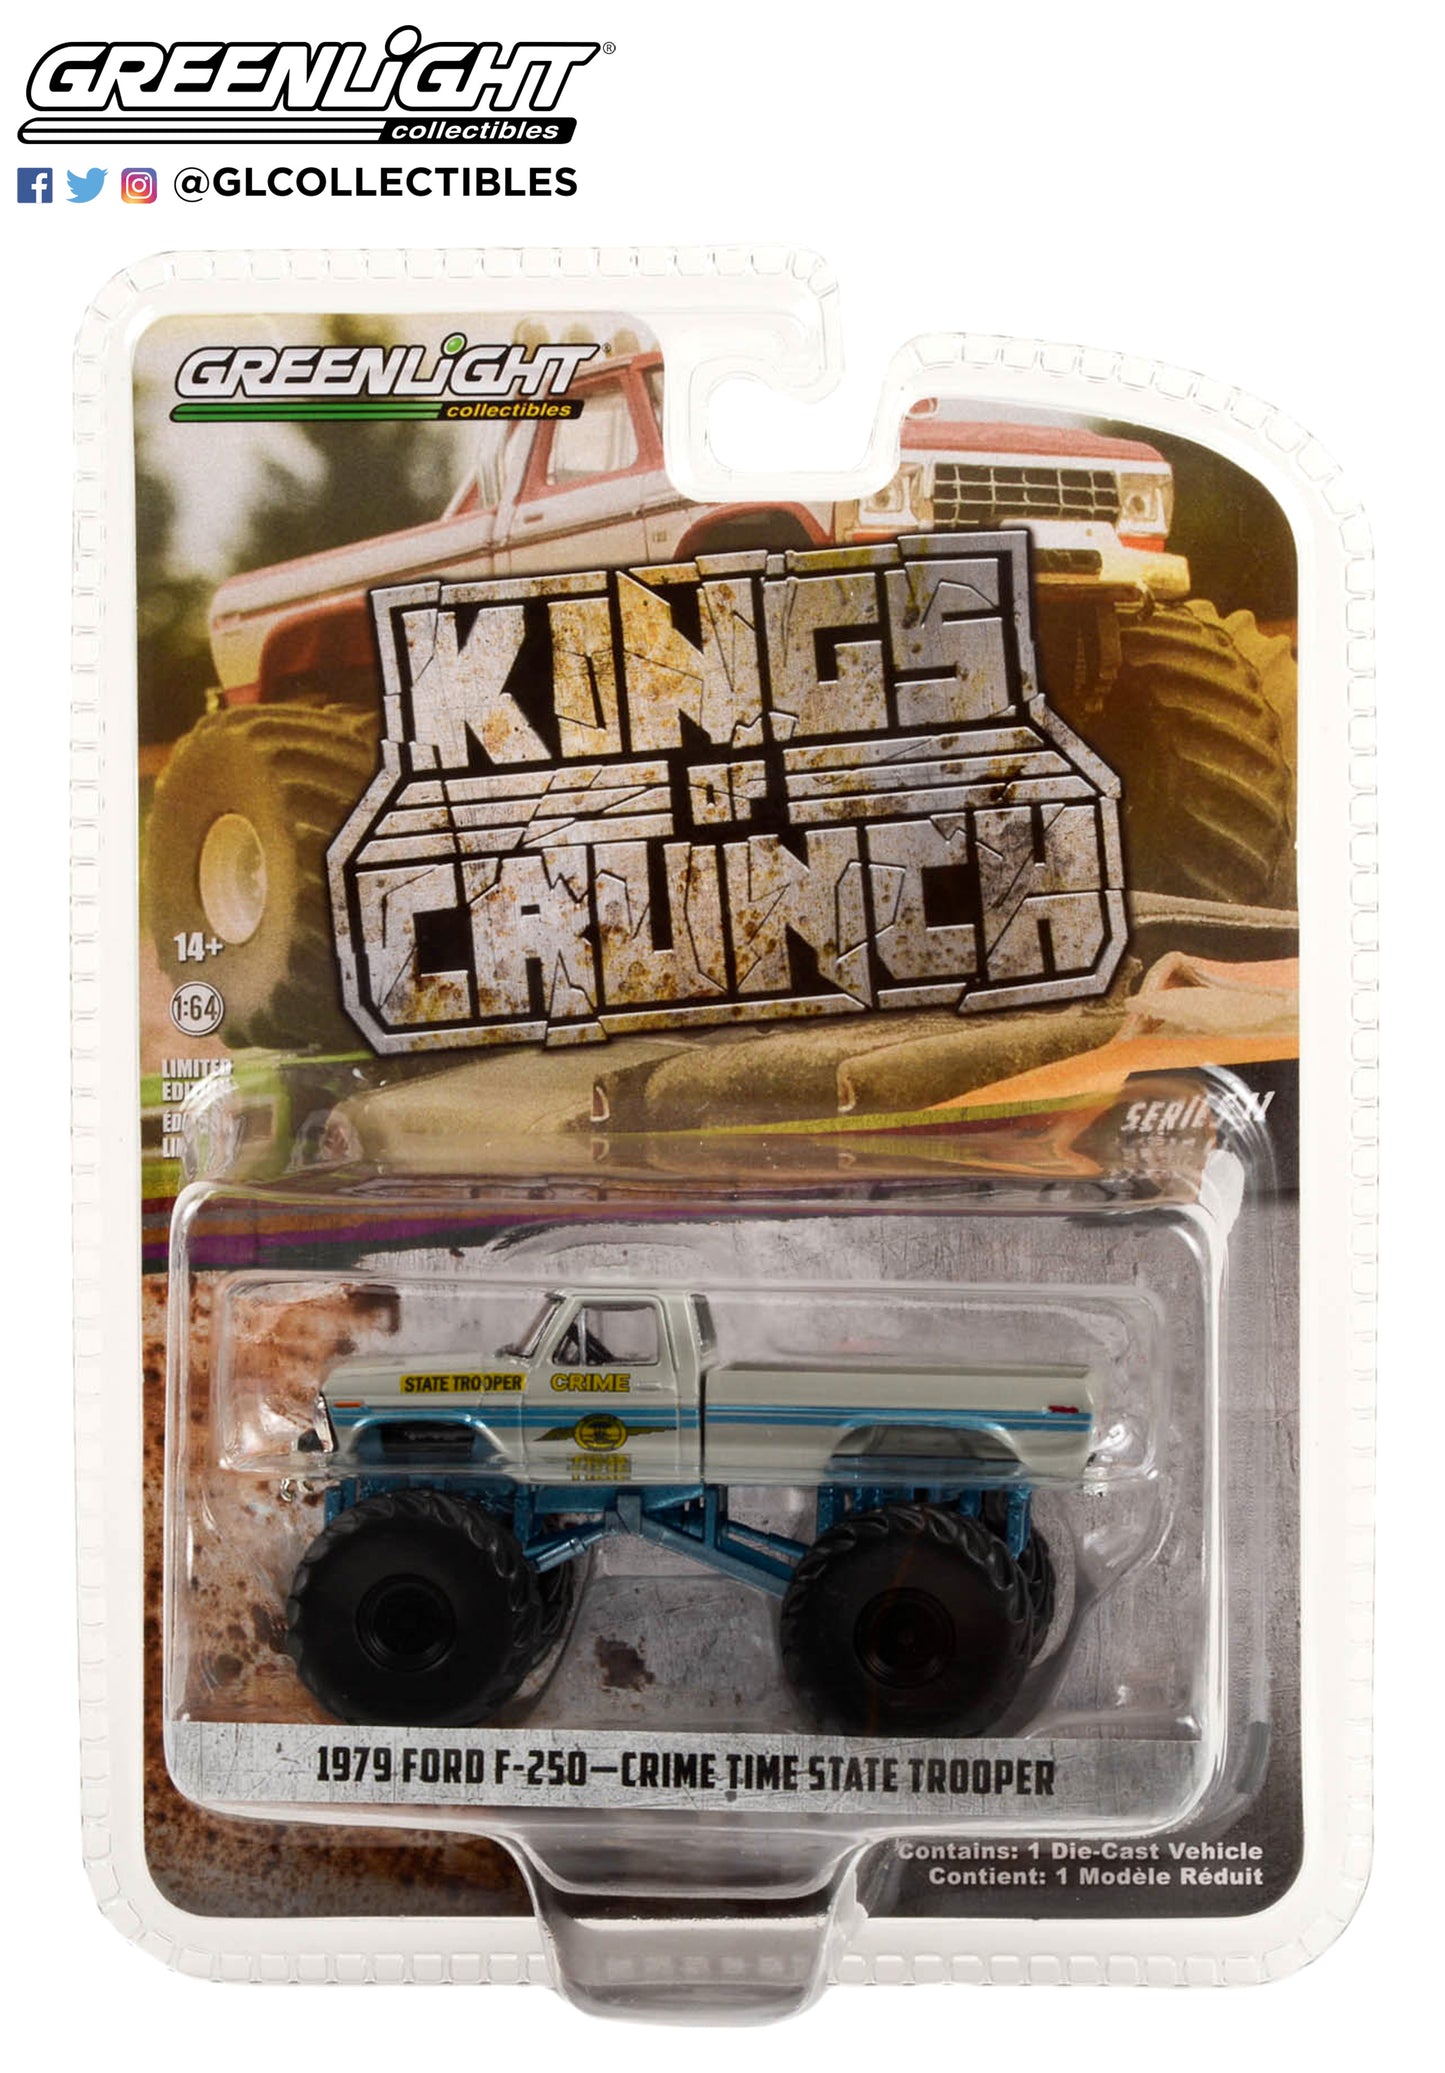 GreenLight 1:64 Kings of Crunch Series 11 - Crime Time State Trooper - 1979 Ford F-250 Monster Truck Solid Pack 49110-C